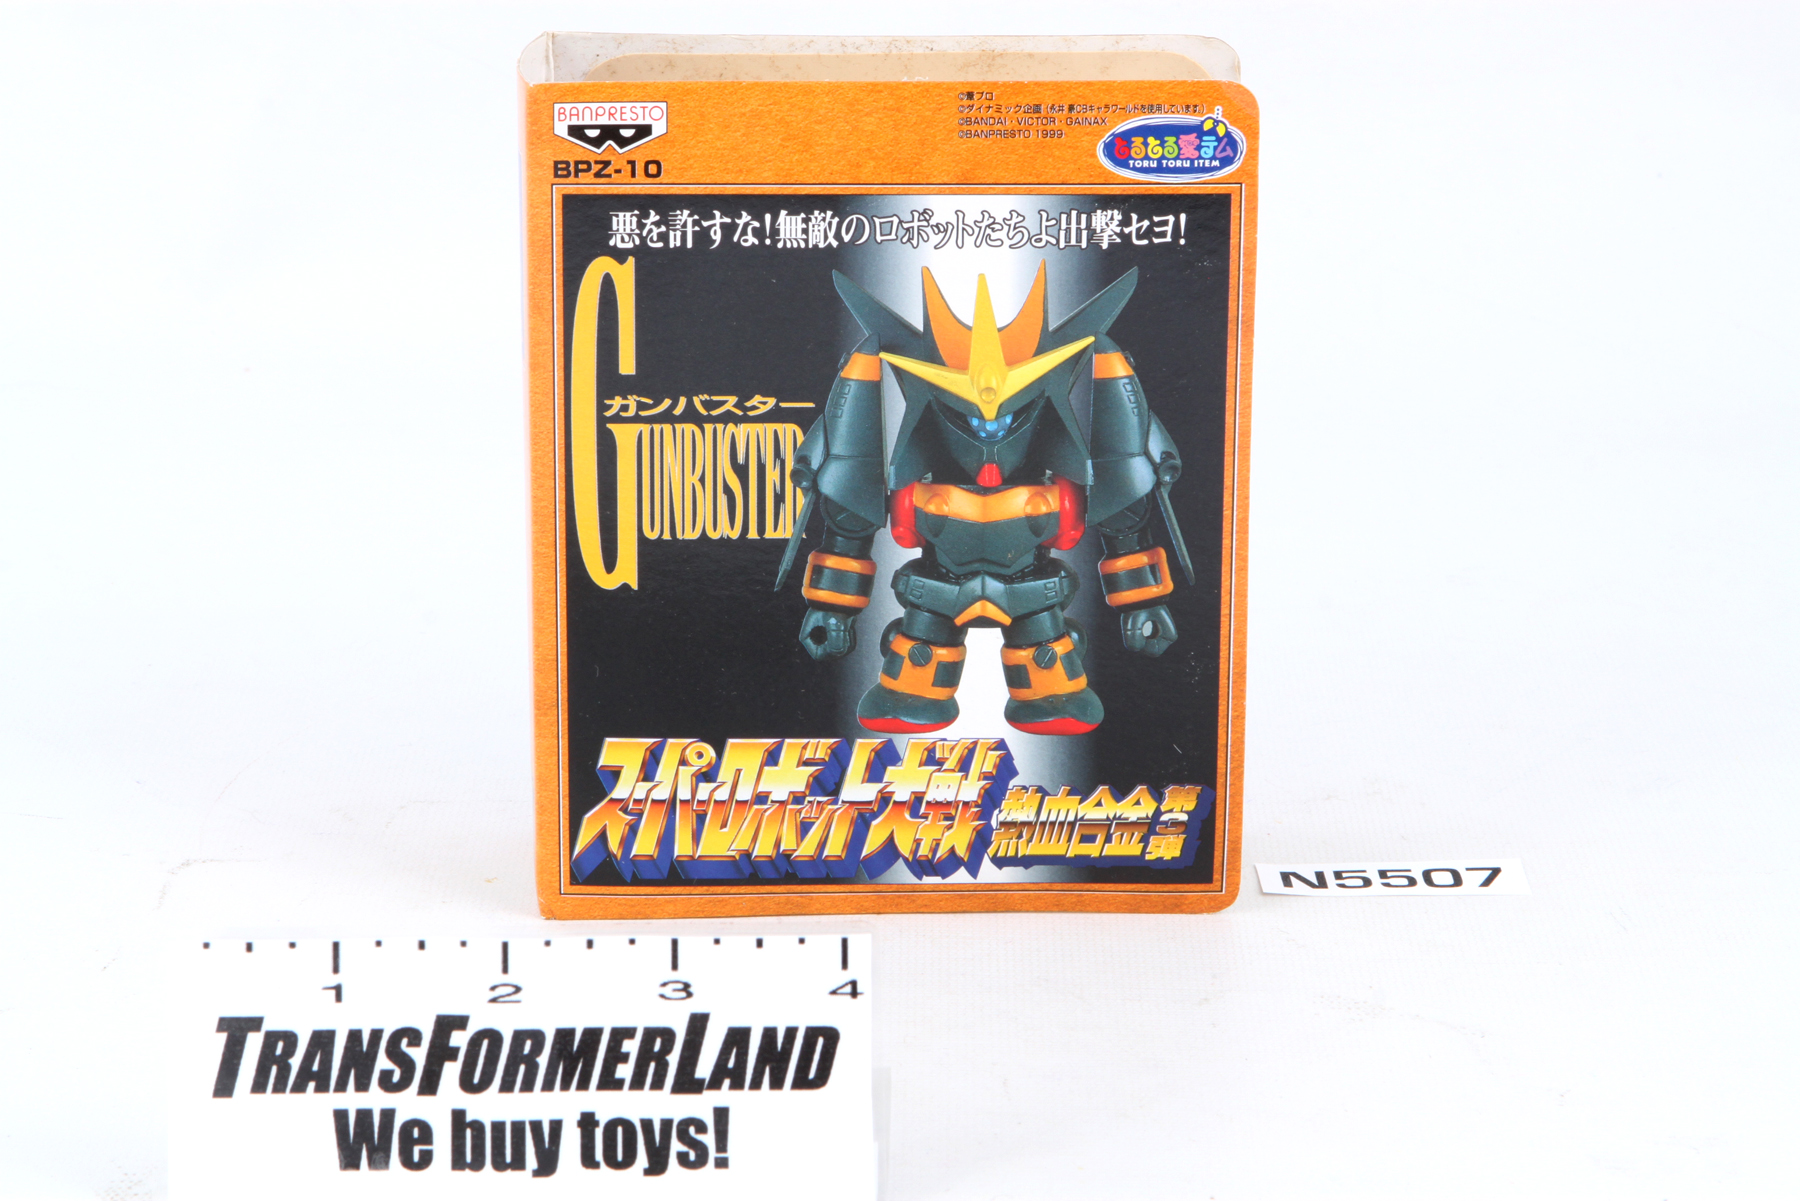 Packaged Not Sealed Chogokin Banpresto Sd Chogokin Action Figures Gunbuster Sku Transformerland Com Largest Selection Best Prices On New Used And Vintage Transformers Figures And Toys